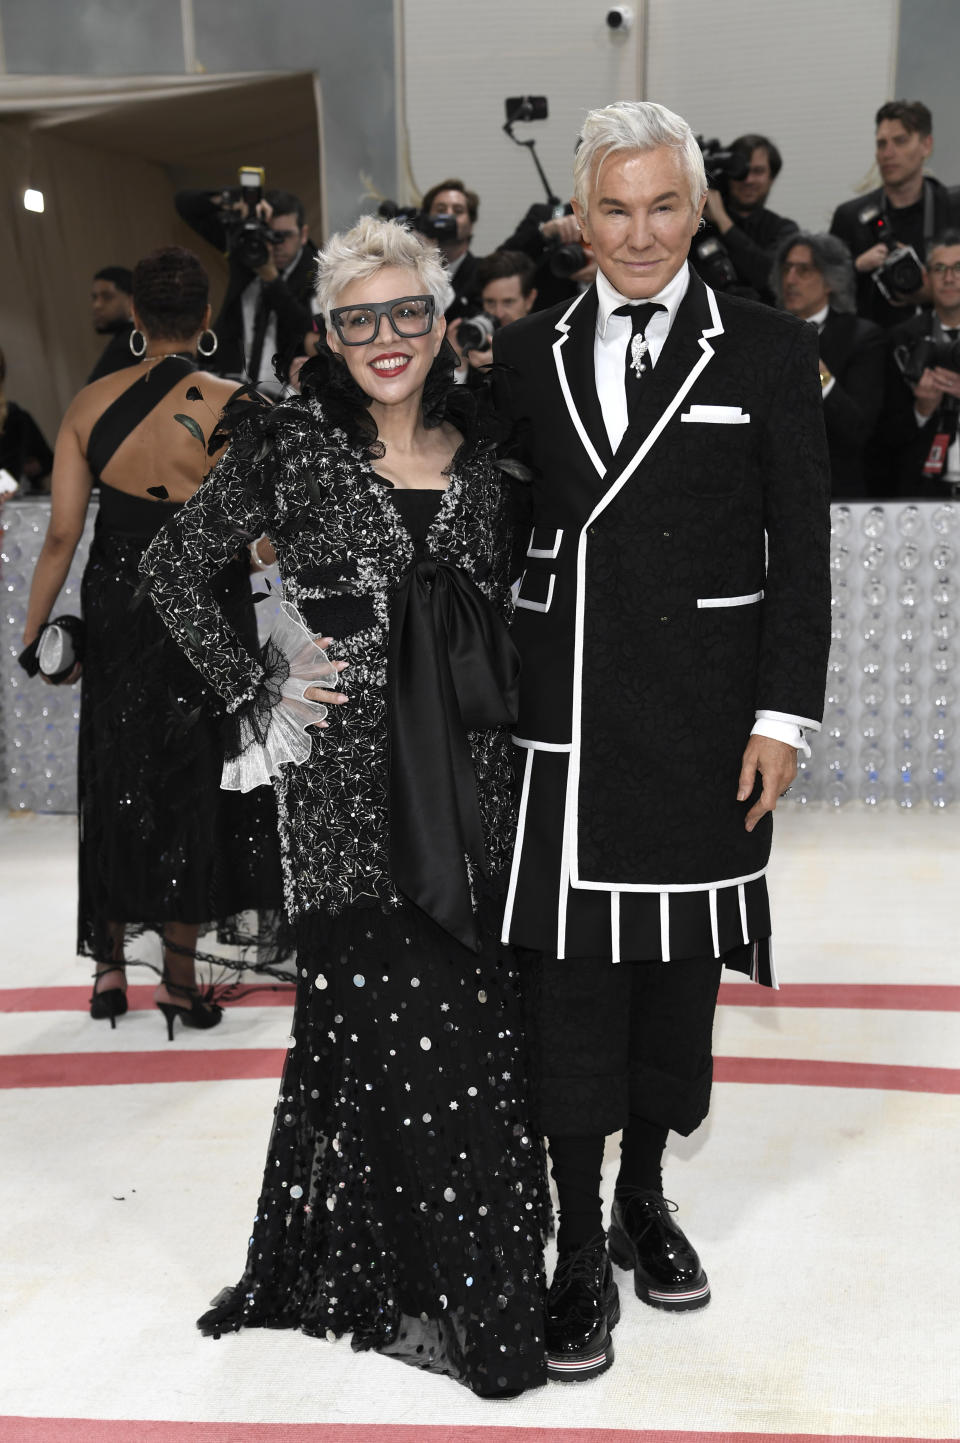 Catherine Martin, left, and Baz Luhrmann attend The Metropolitan Museum of Art's Costume Institute benefit gala celebrating the opening of the "Karl Lagerfeld: A Line of Beauty" exhibition on Monday, May 1, 2023, in New York. (Photo by Evan Agostini/Invision/AP)